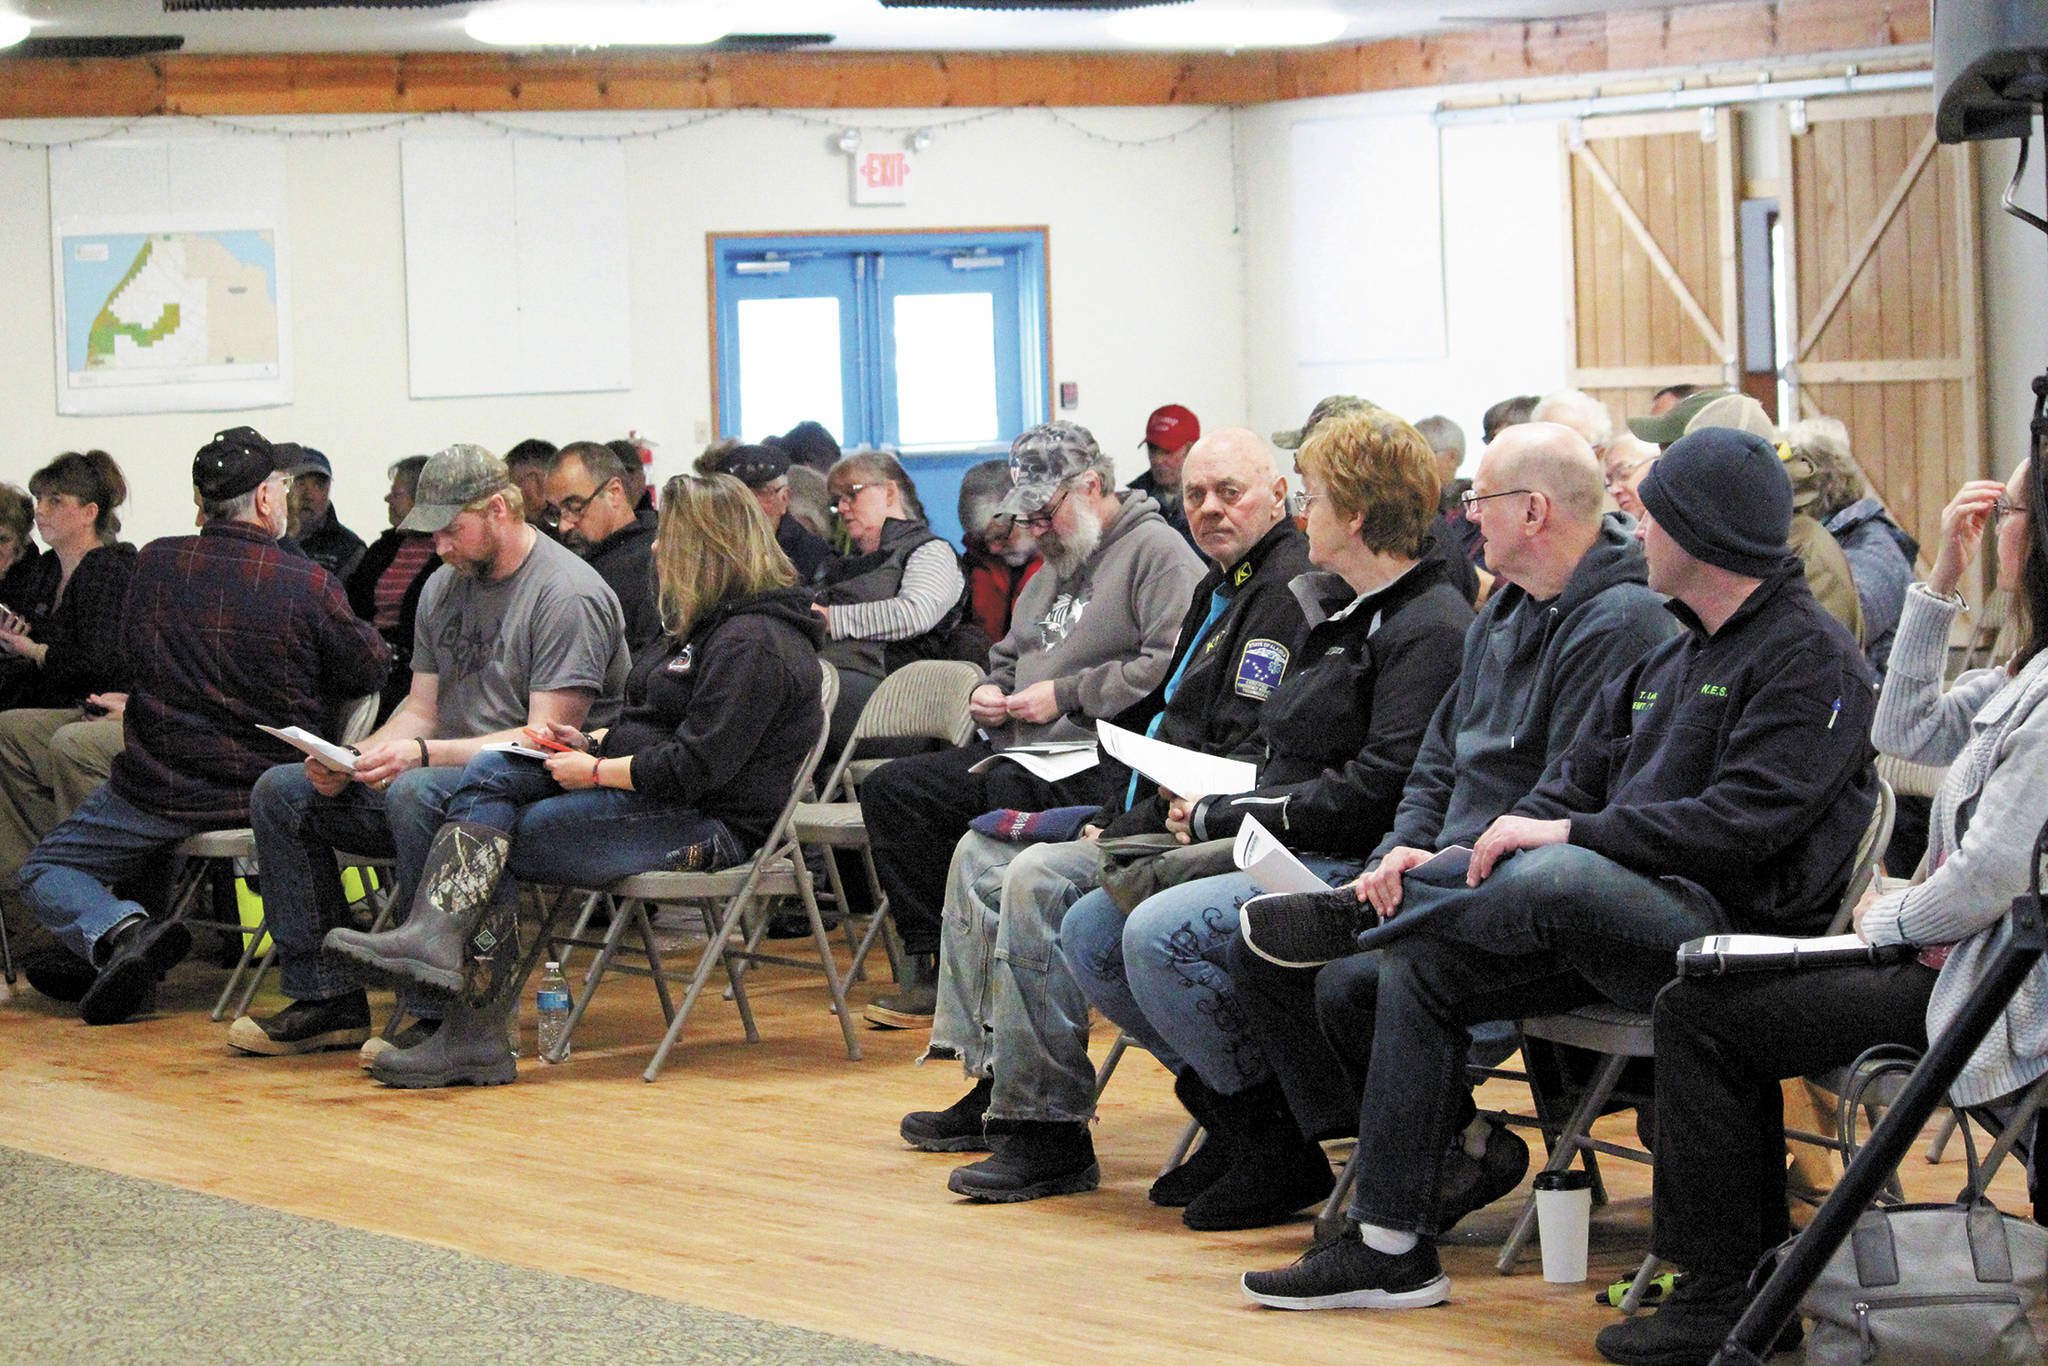 Members of the Ninilchik community wait to hear a presentation by Kenai Peninsula Borough staff during a public hearing Monday, March 9, 2020 at the Kenai Peninsula Fairgrounds in Ninilchik, Alaska. The public hearing was to gather input on whether people in Ninilchik would want to pursue an official borough service area for fire and EMS services. (Photo by Megan Pacer/Homer News)